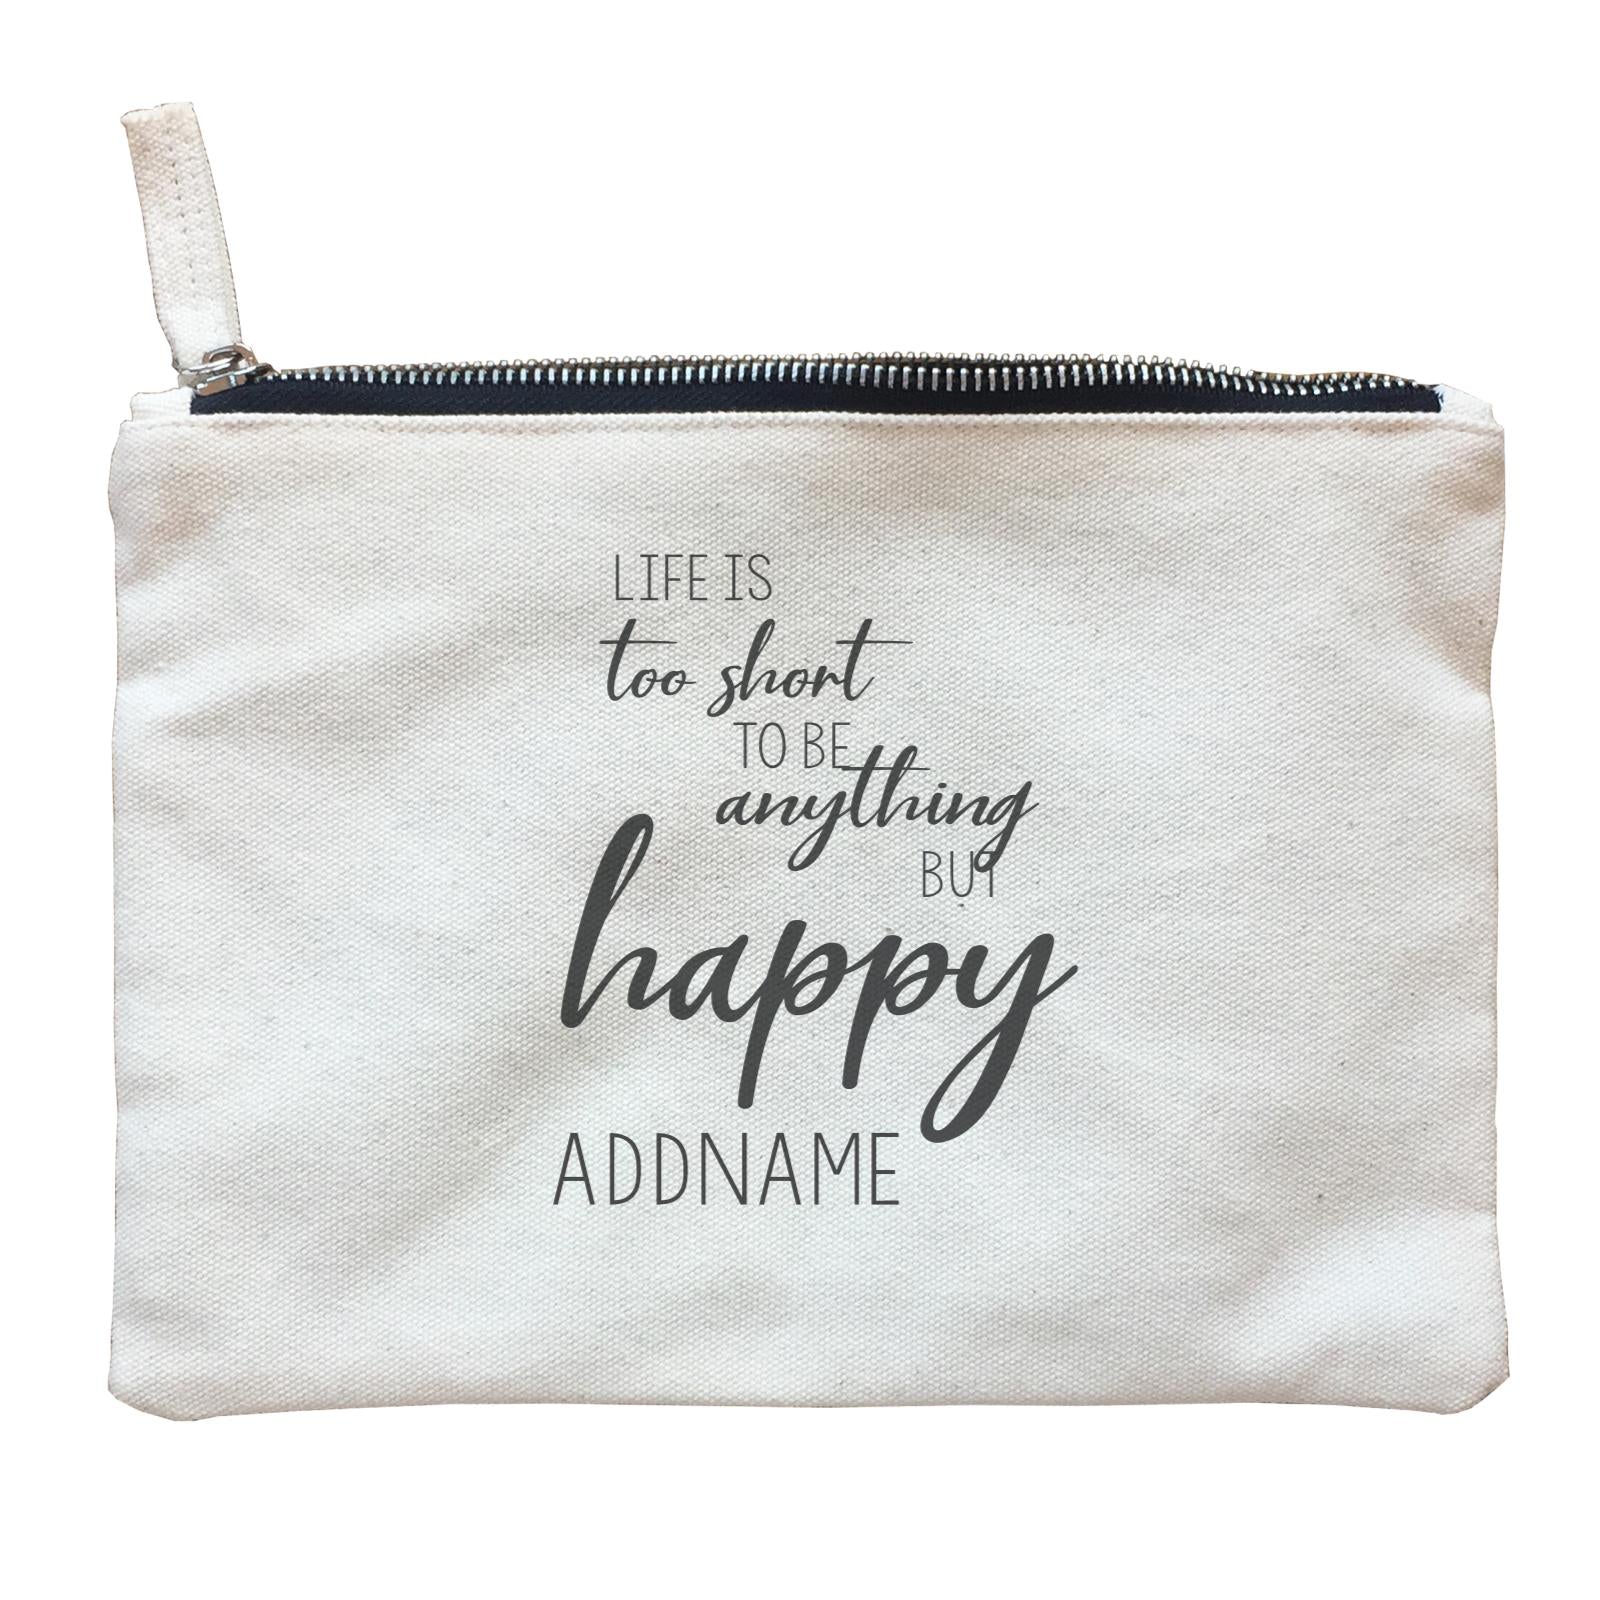 Inspiration Quotes Life Is Too Short To Be Anything But Happy Addname Zipper Pouch